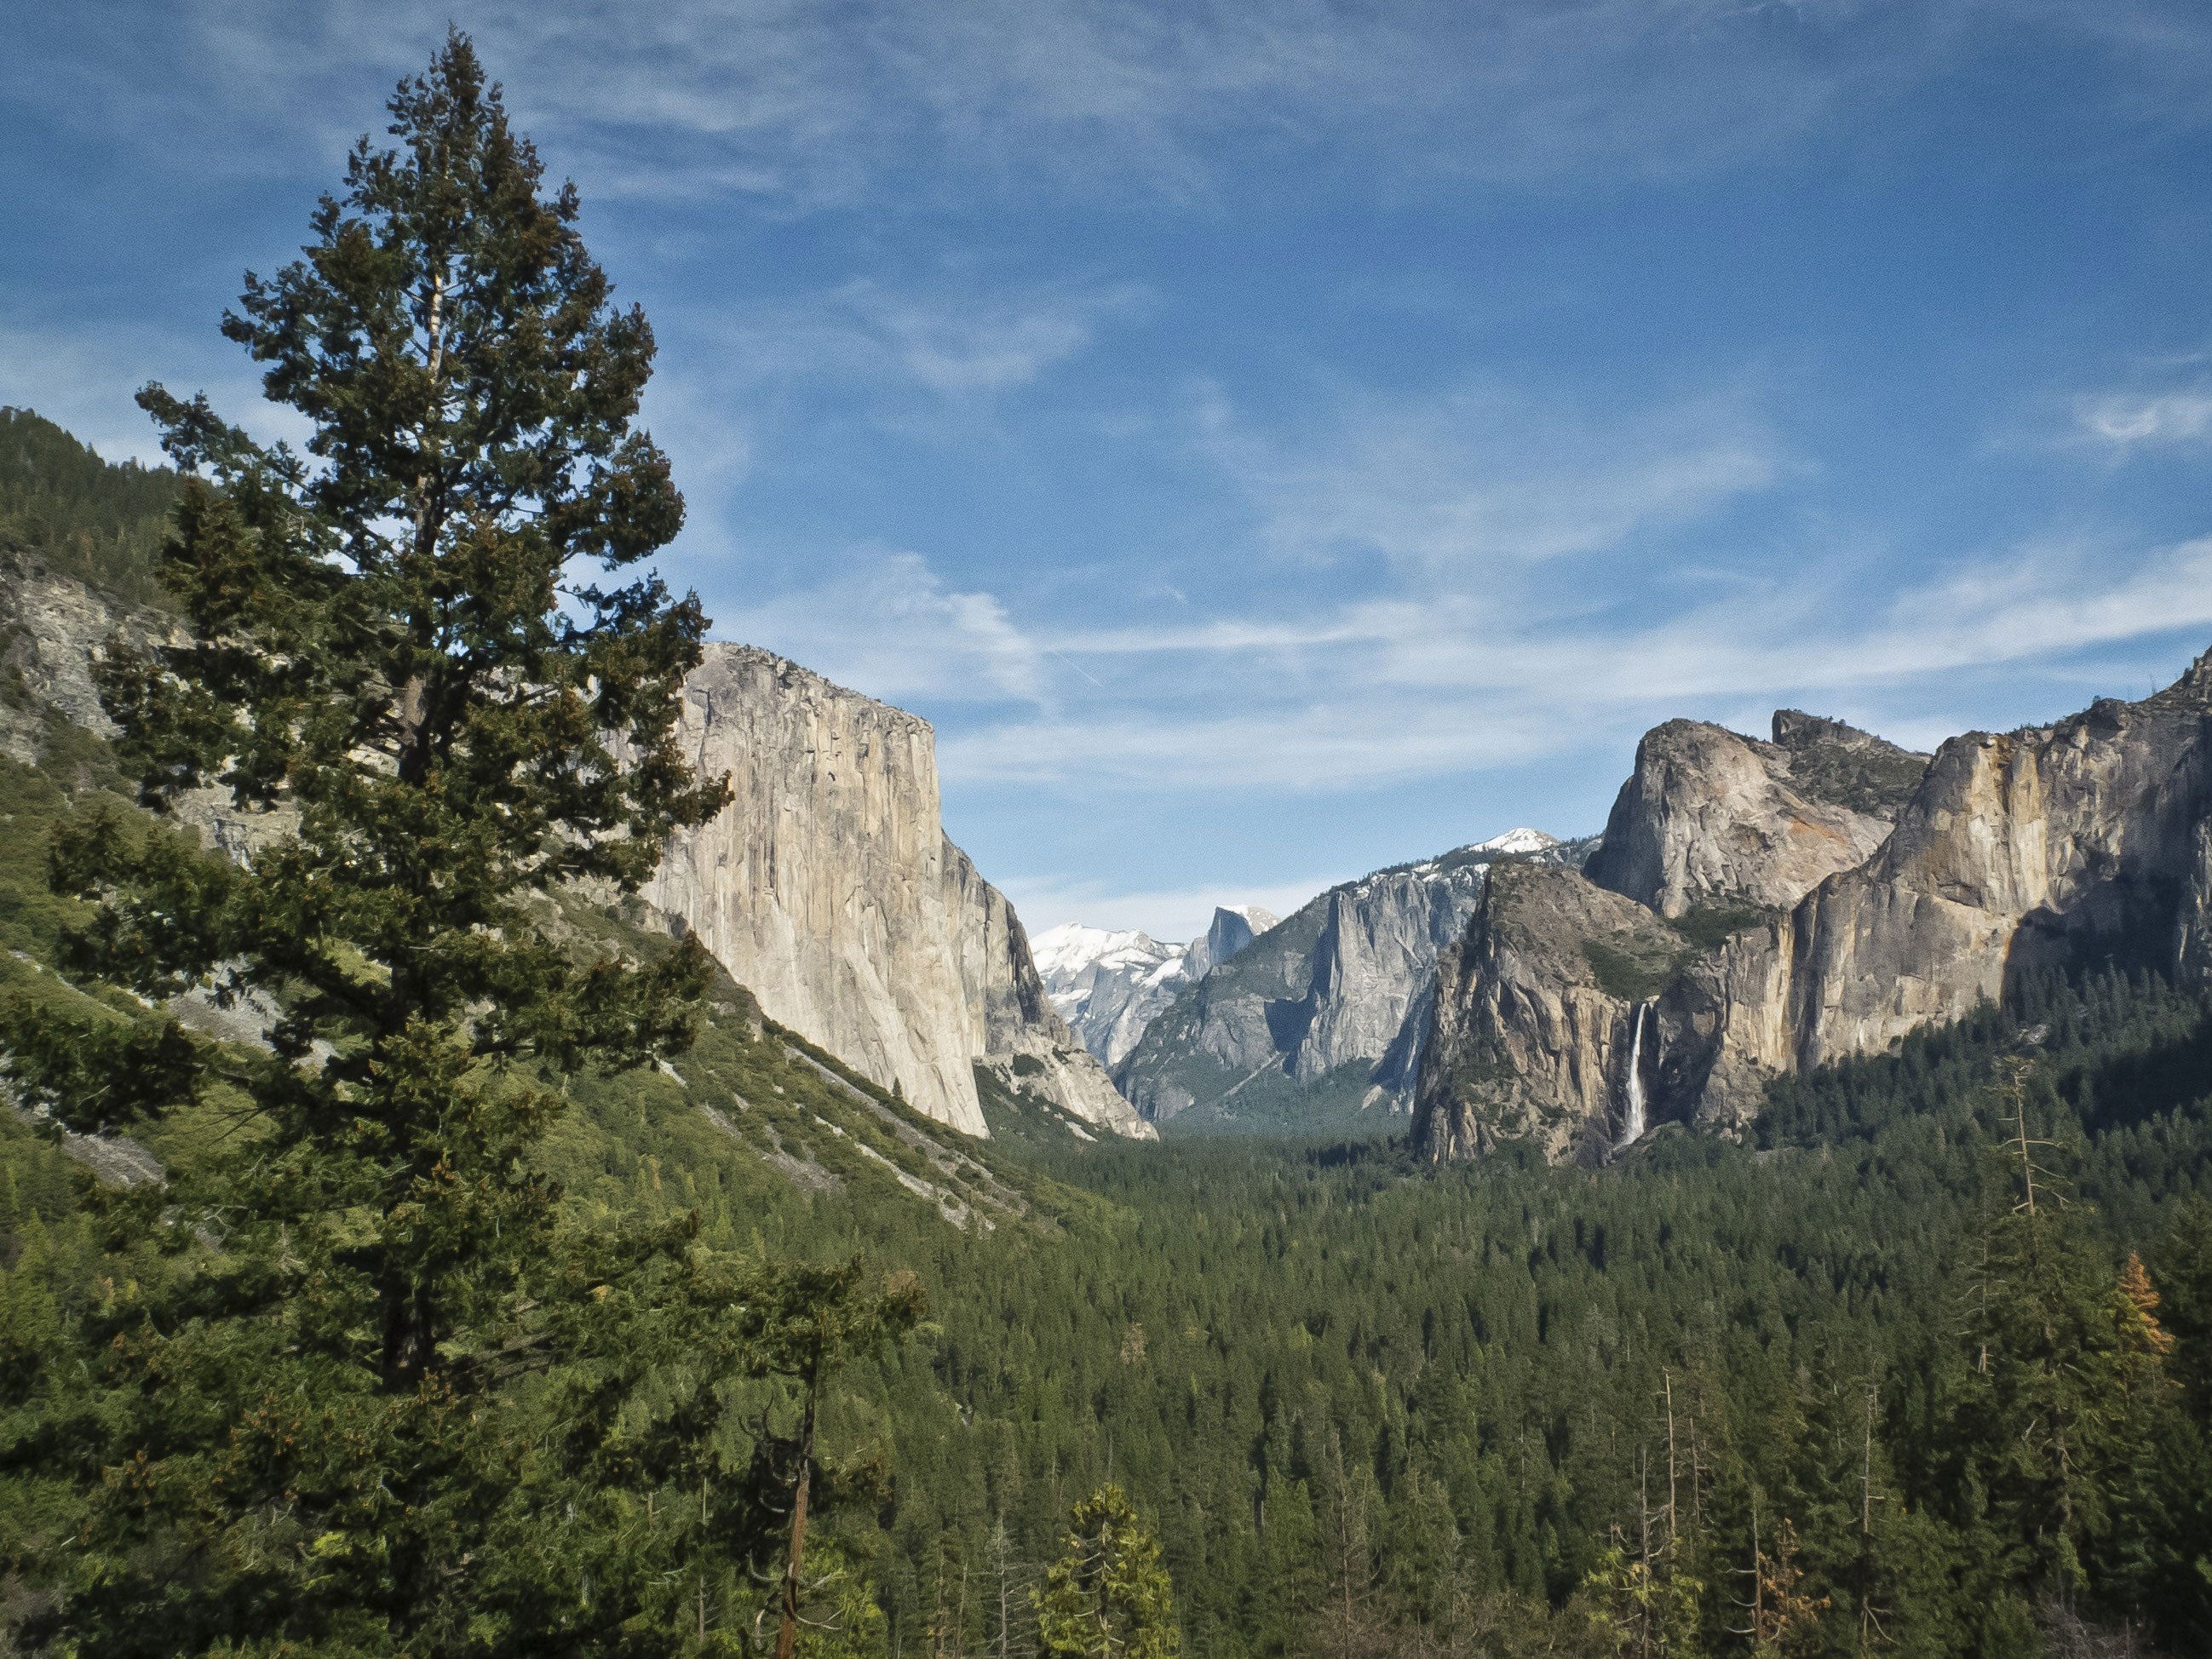 The child was camping in Yosemite National Park when he contracted the disease